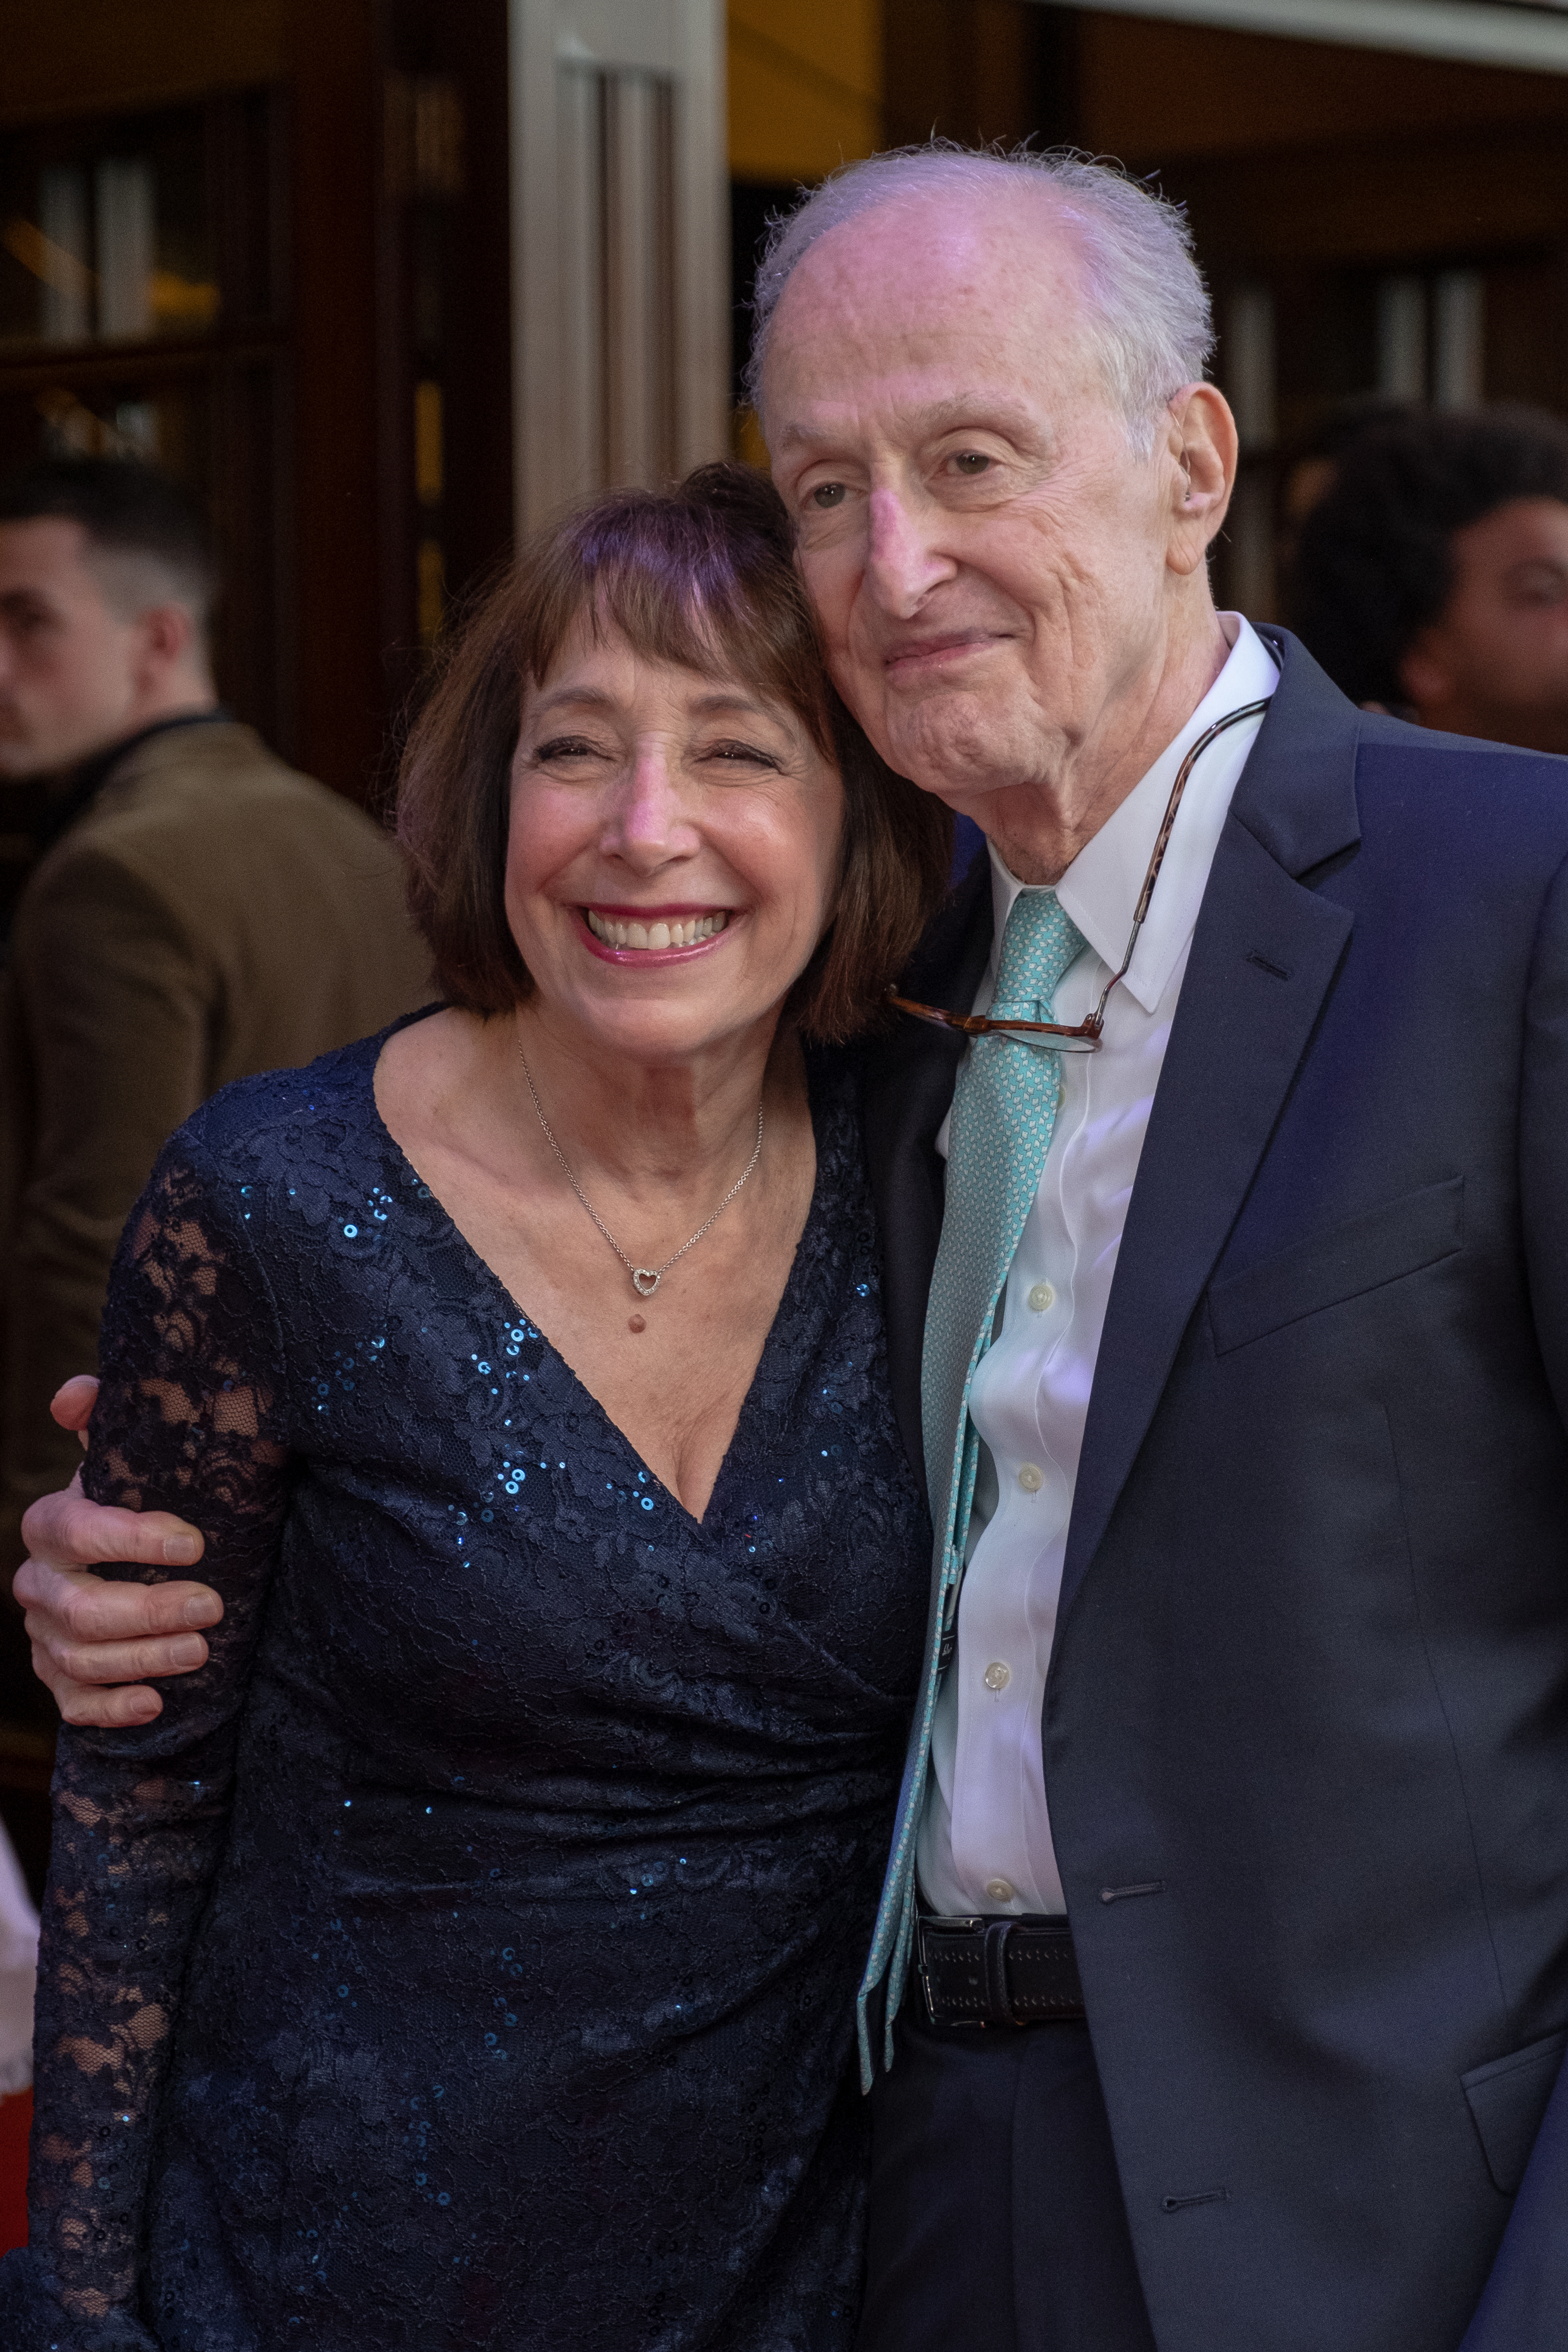 Didi Conn and David Shire seen attending the gala performance of "Big The Musical" on September 17, 2019 in London. | Source: Getty Images